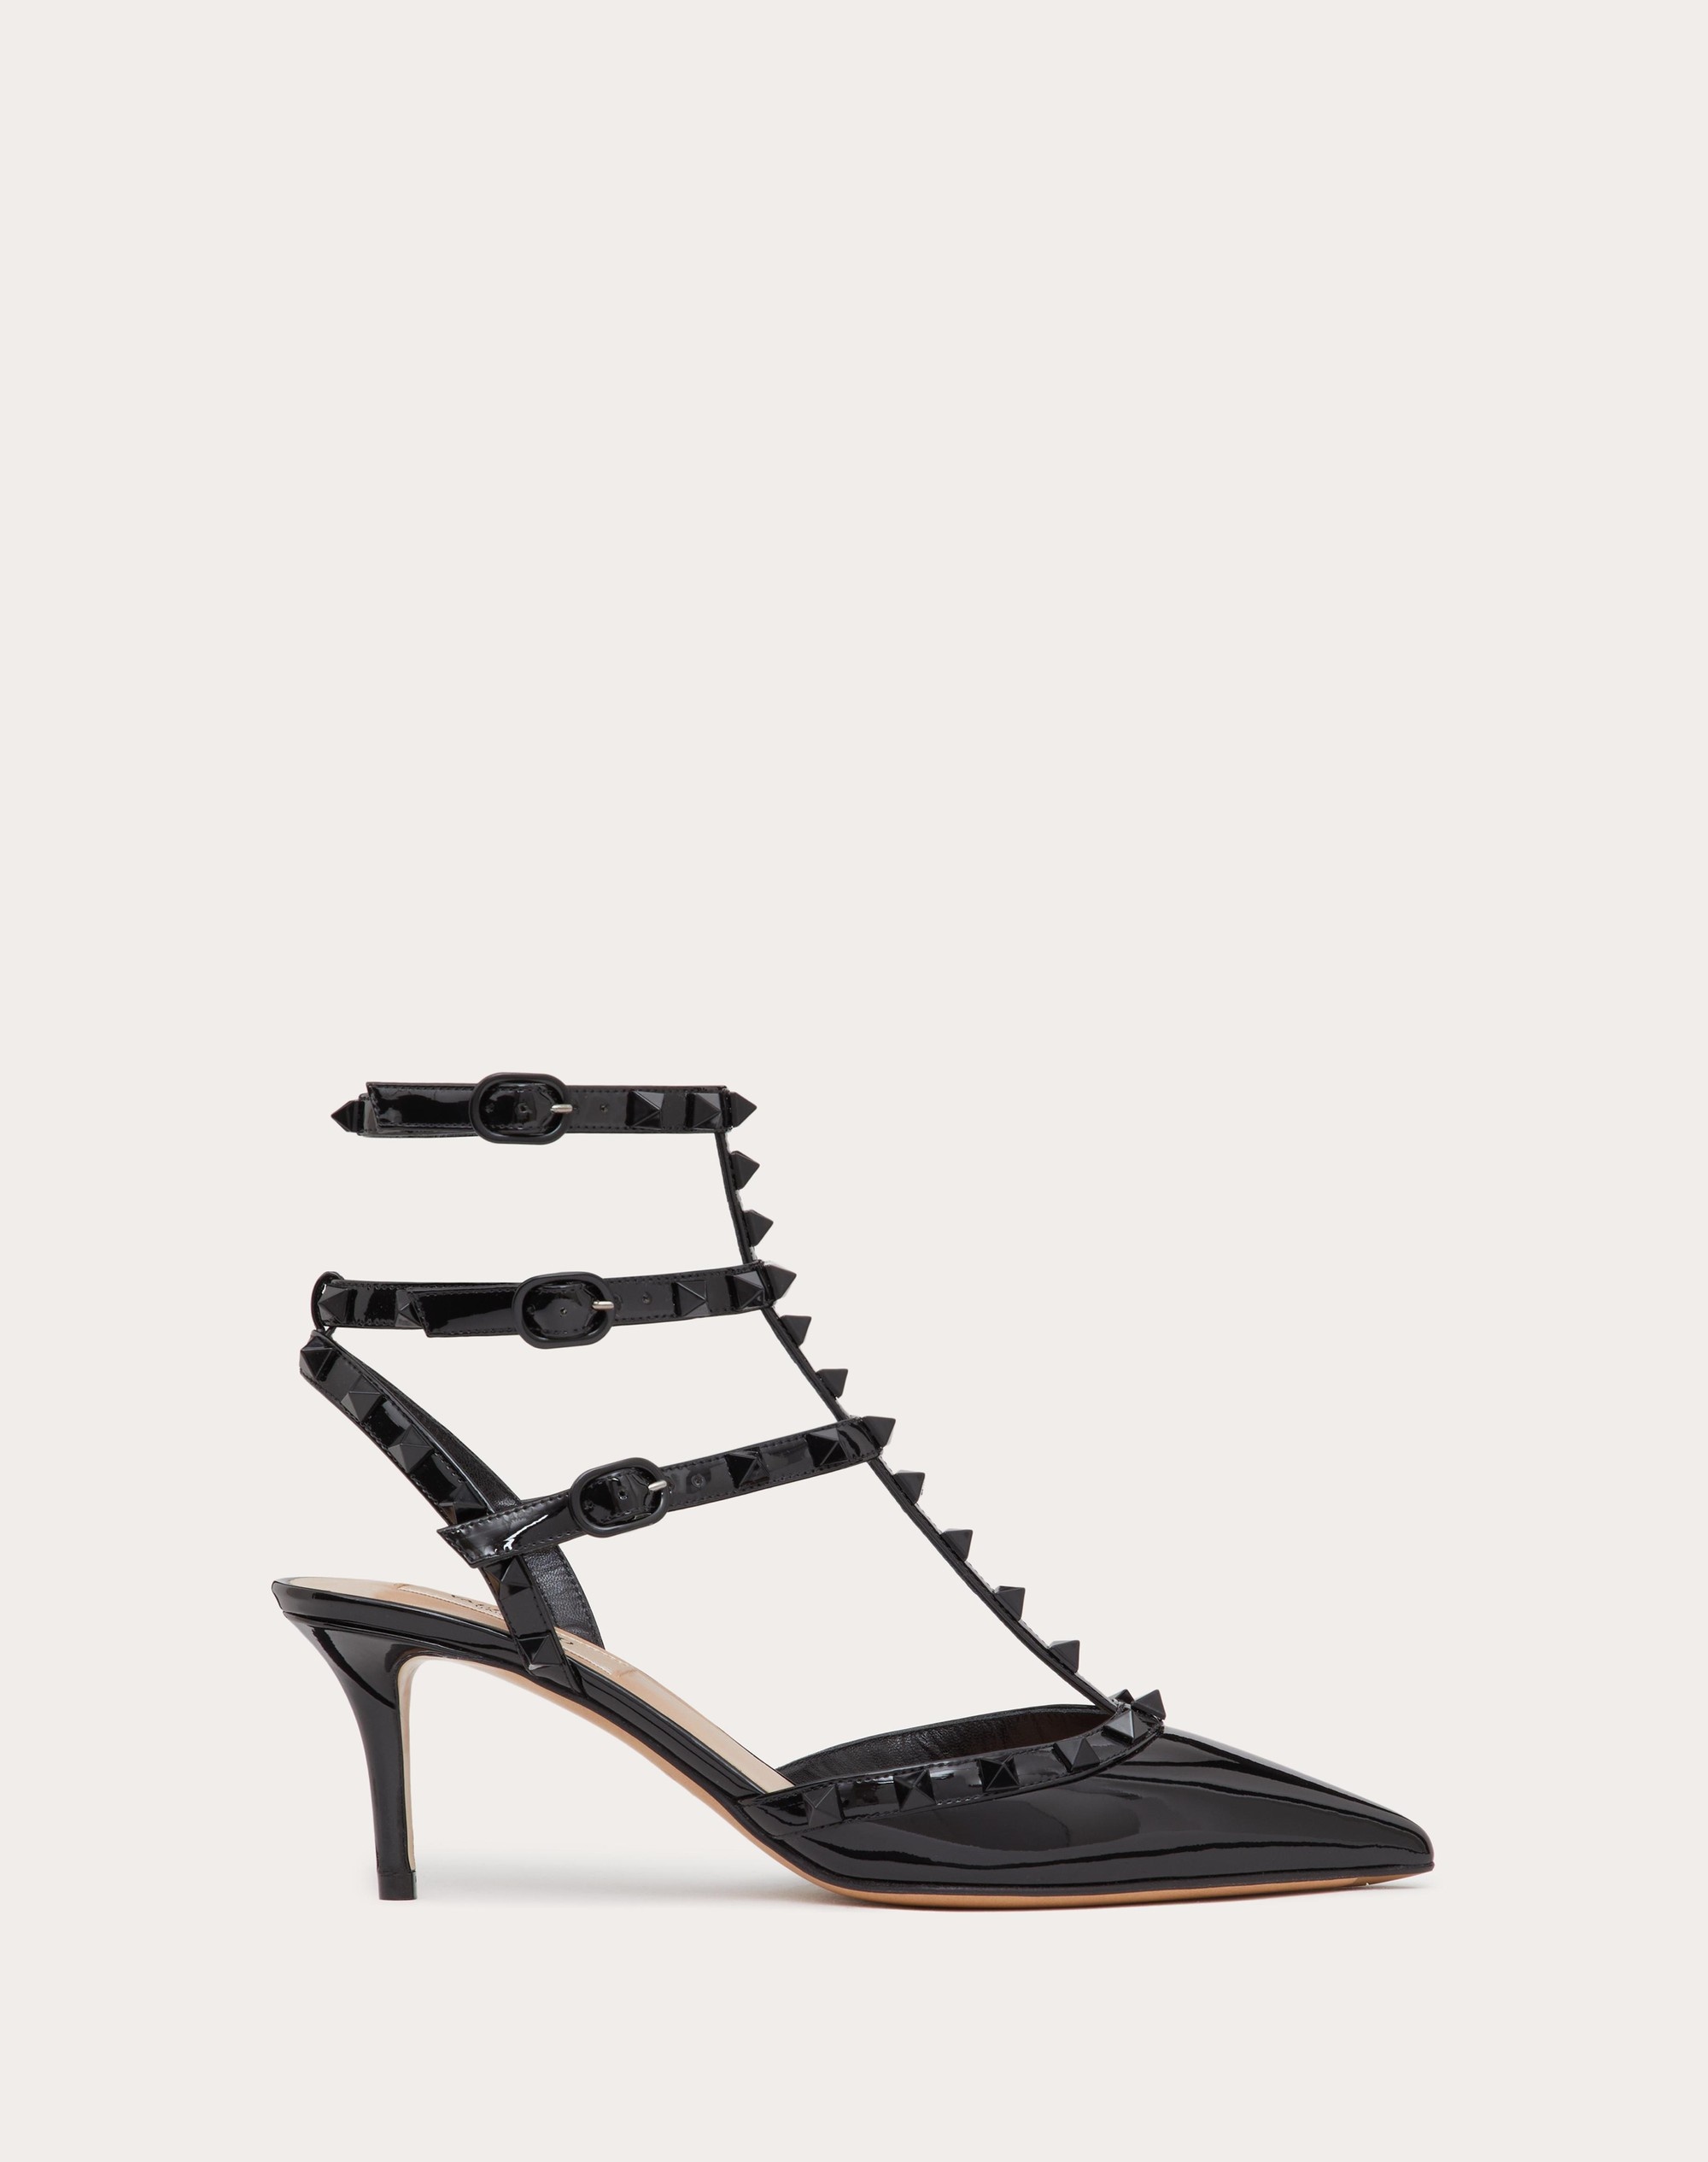 PATENT ROCKSTUD PUMPS WITH MATCHING STRAPS AND STUDS 65 MM - 1